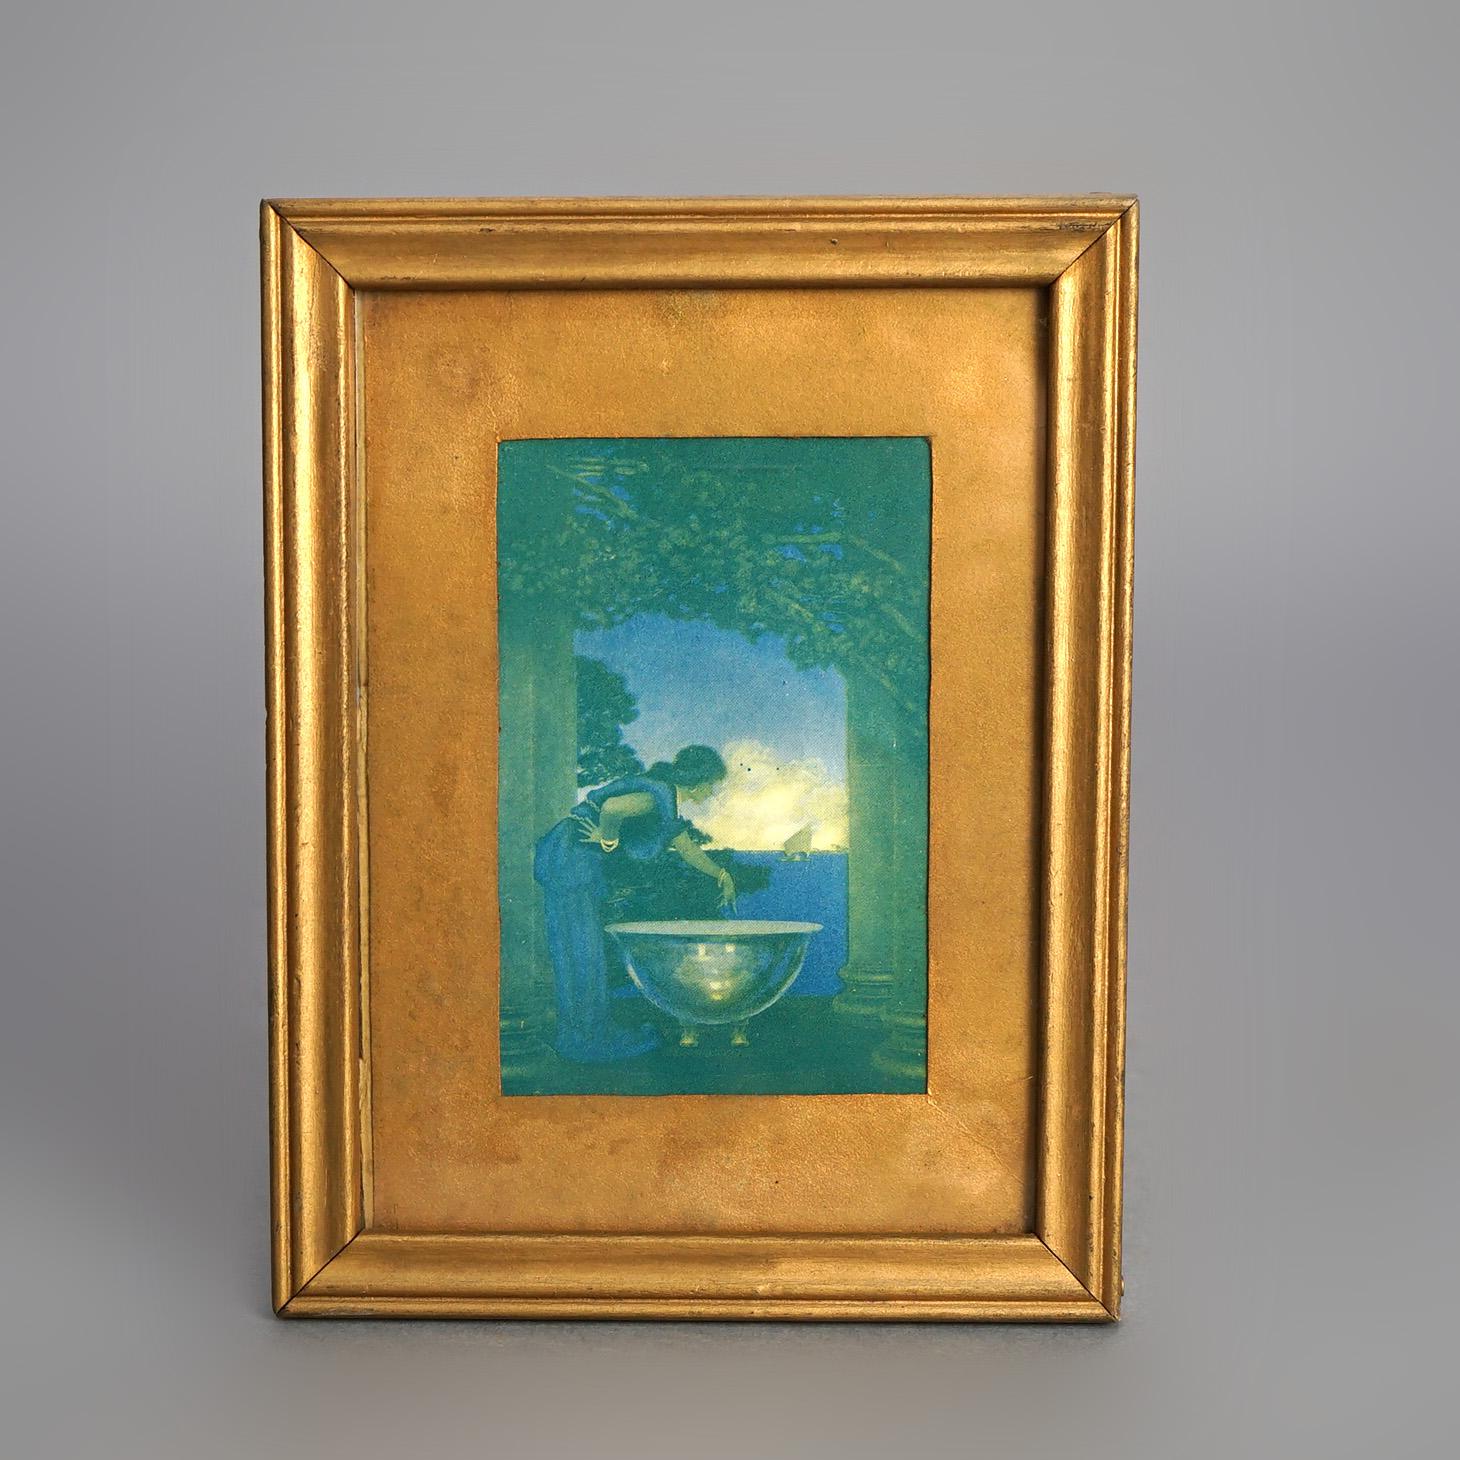 Three Art Deco Maxfield Parrish Prints Including “The Prince”, C1920

Measures - largest 13.25